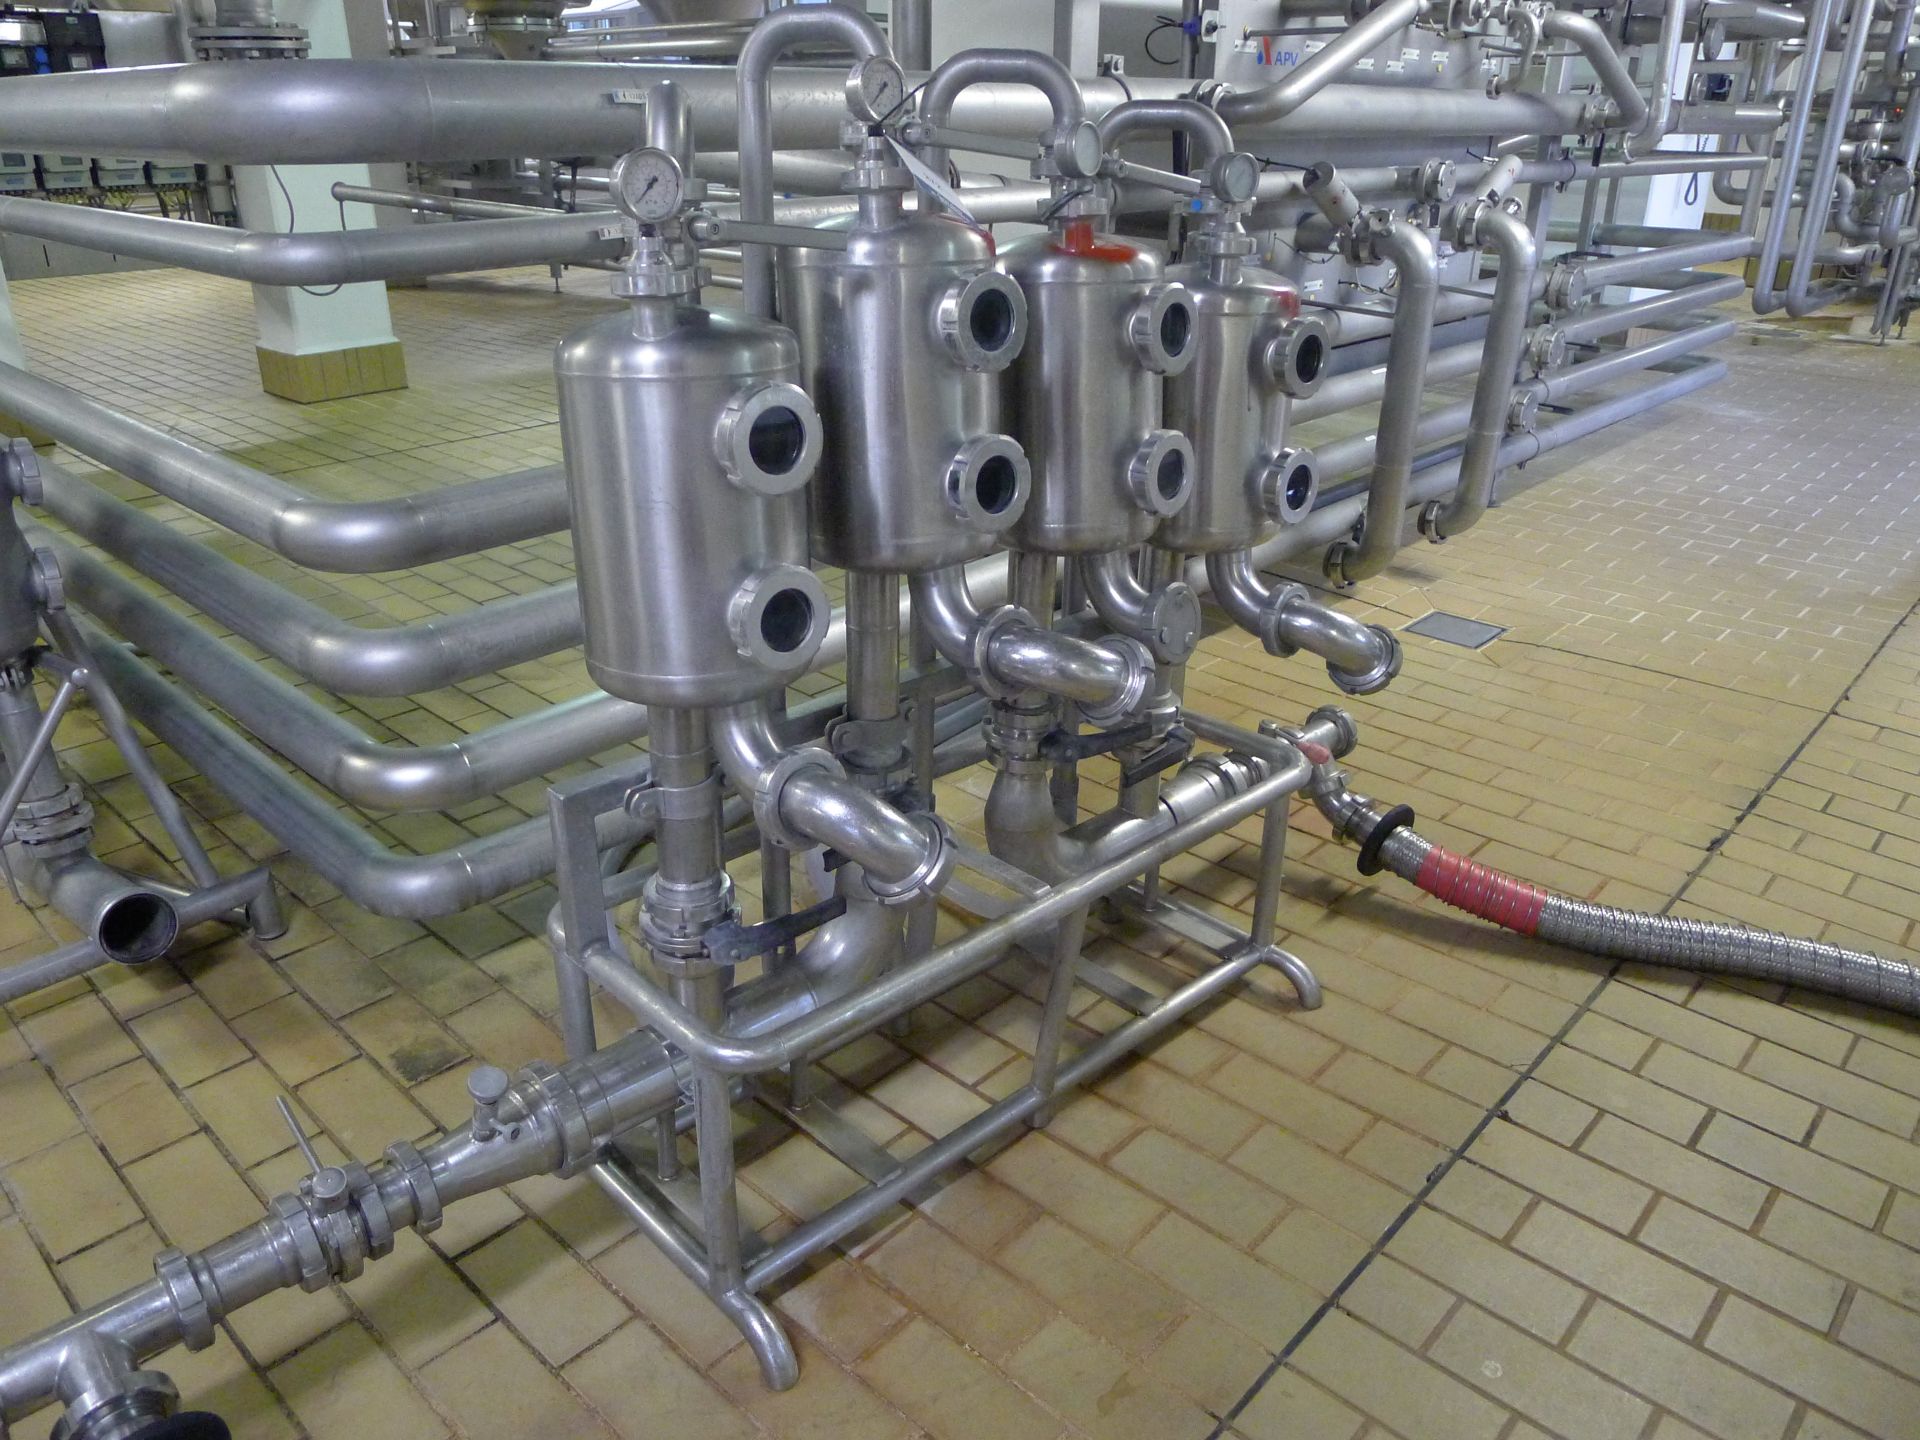 Stainless Steel 4 Head Liquid Dividing Unit (Dismantling and Loading Fee: €125)